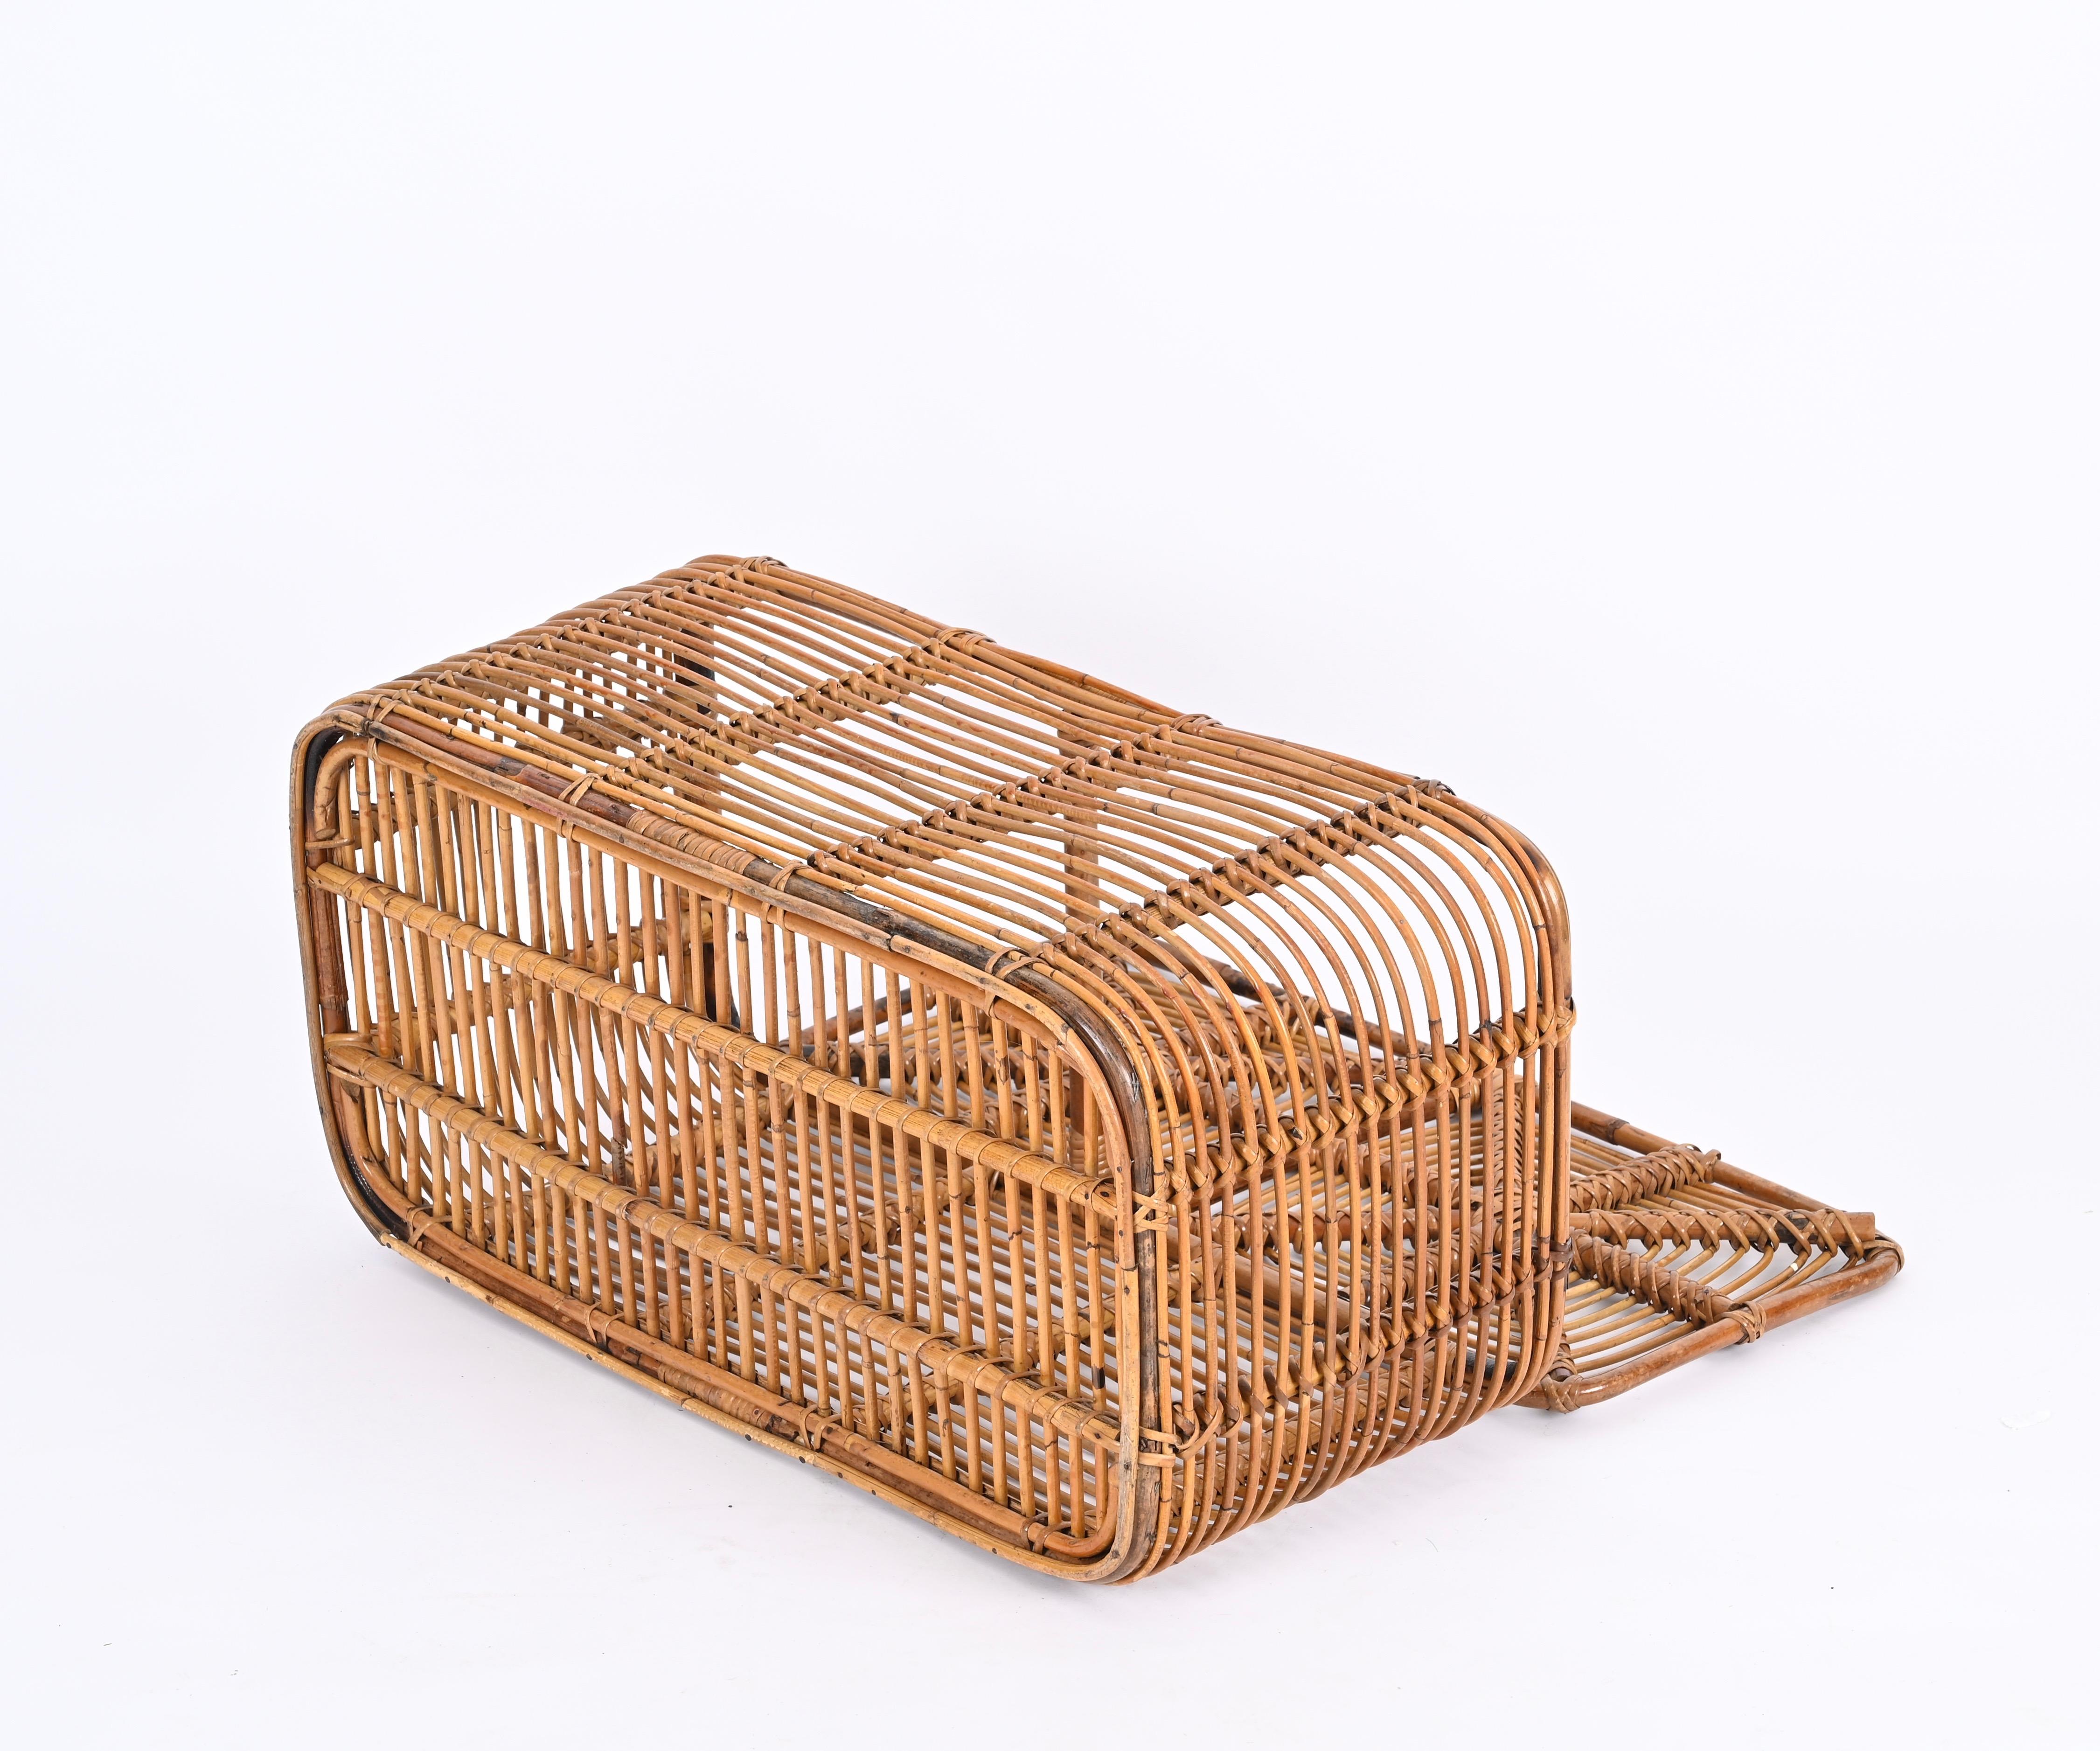 Midcentury French Riviera Bamboo and Woven Rattan Italian Basket, 1960s For Sale 7